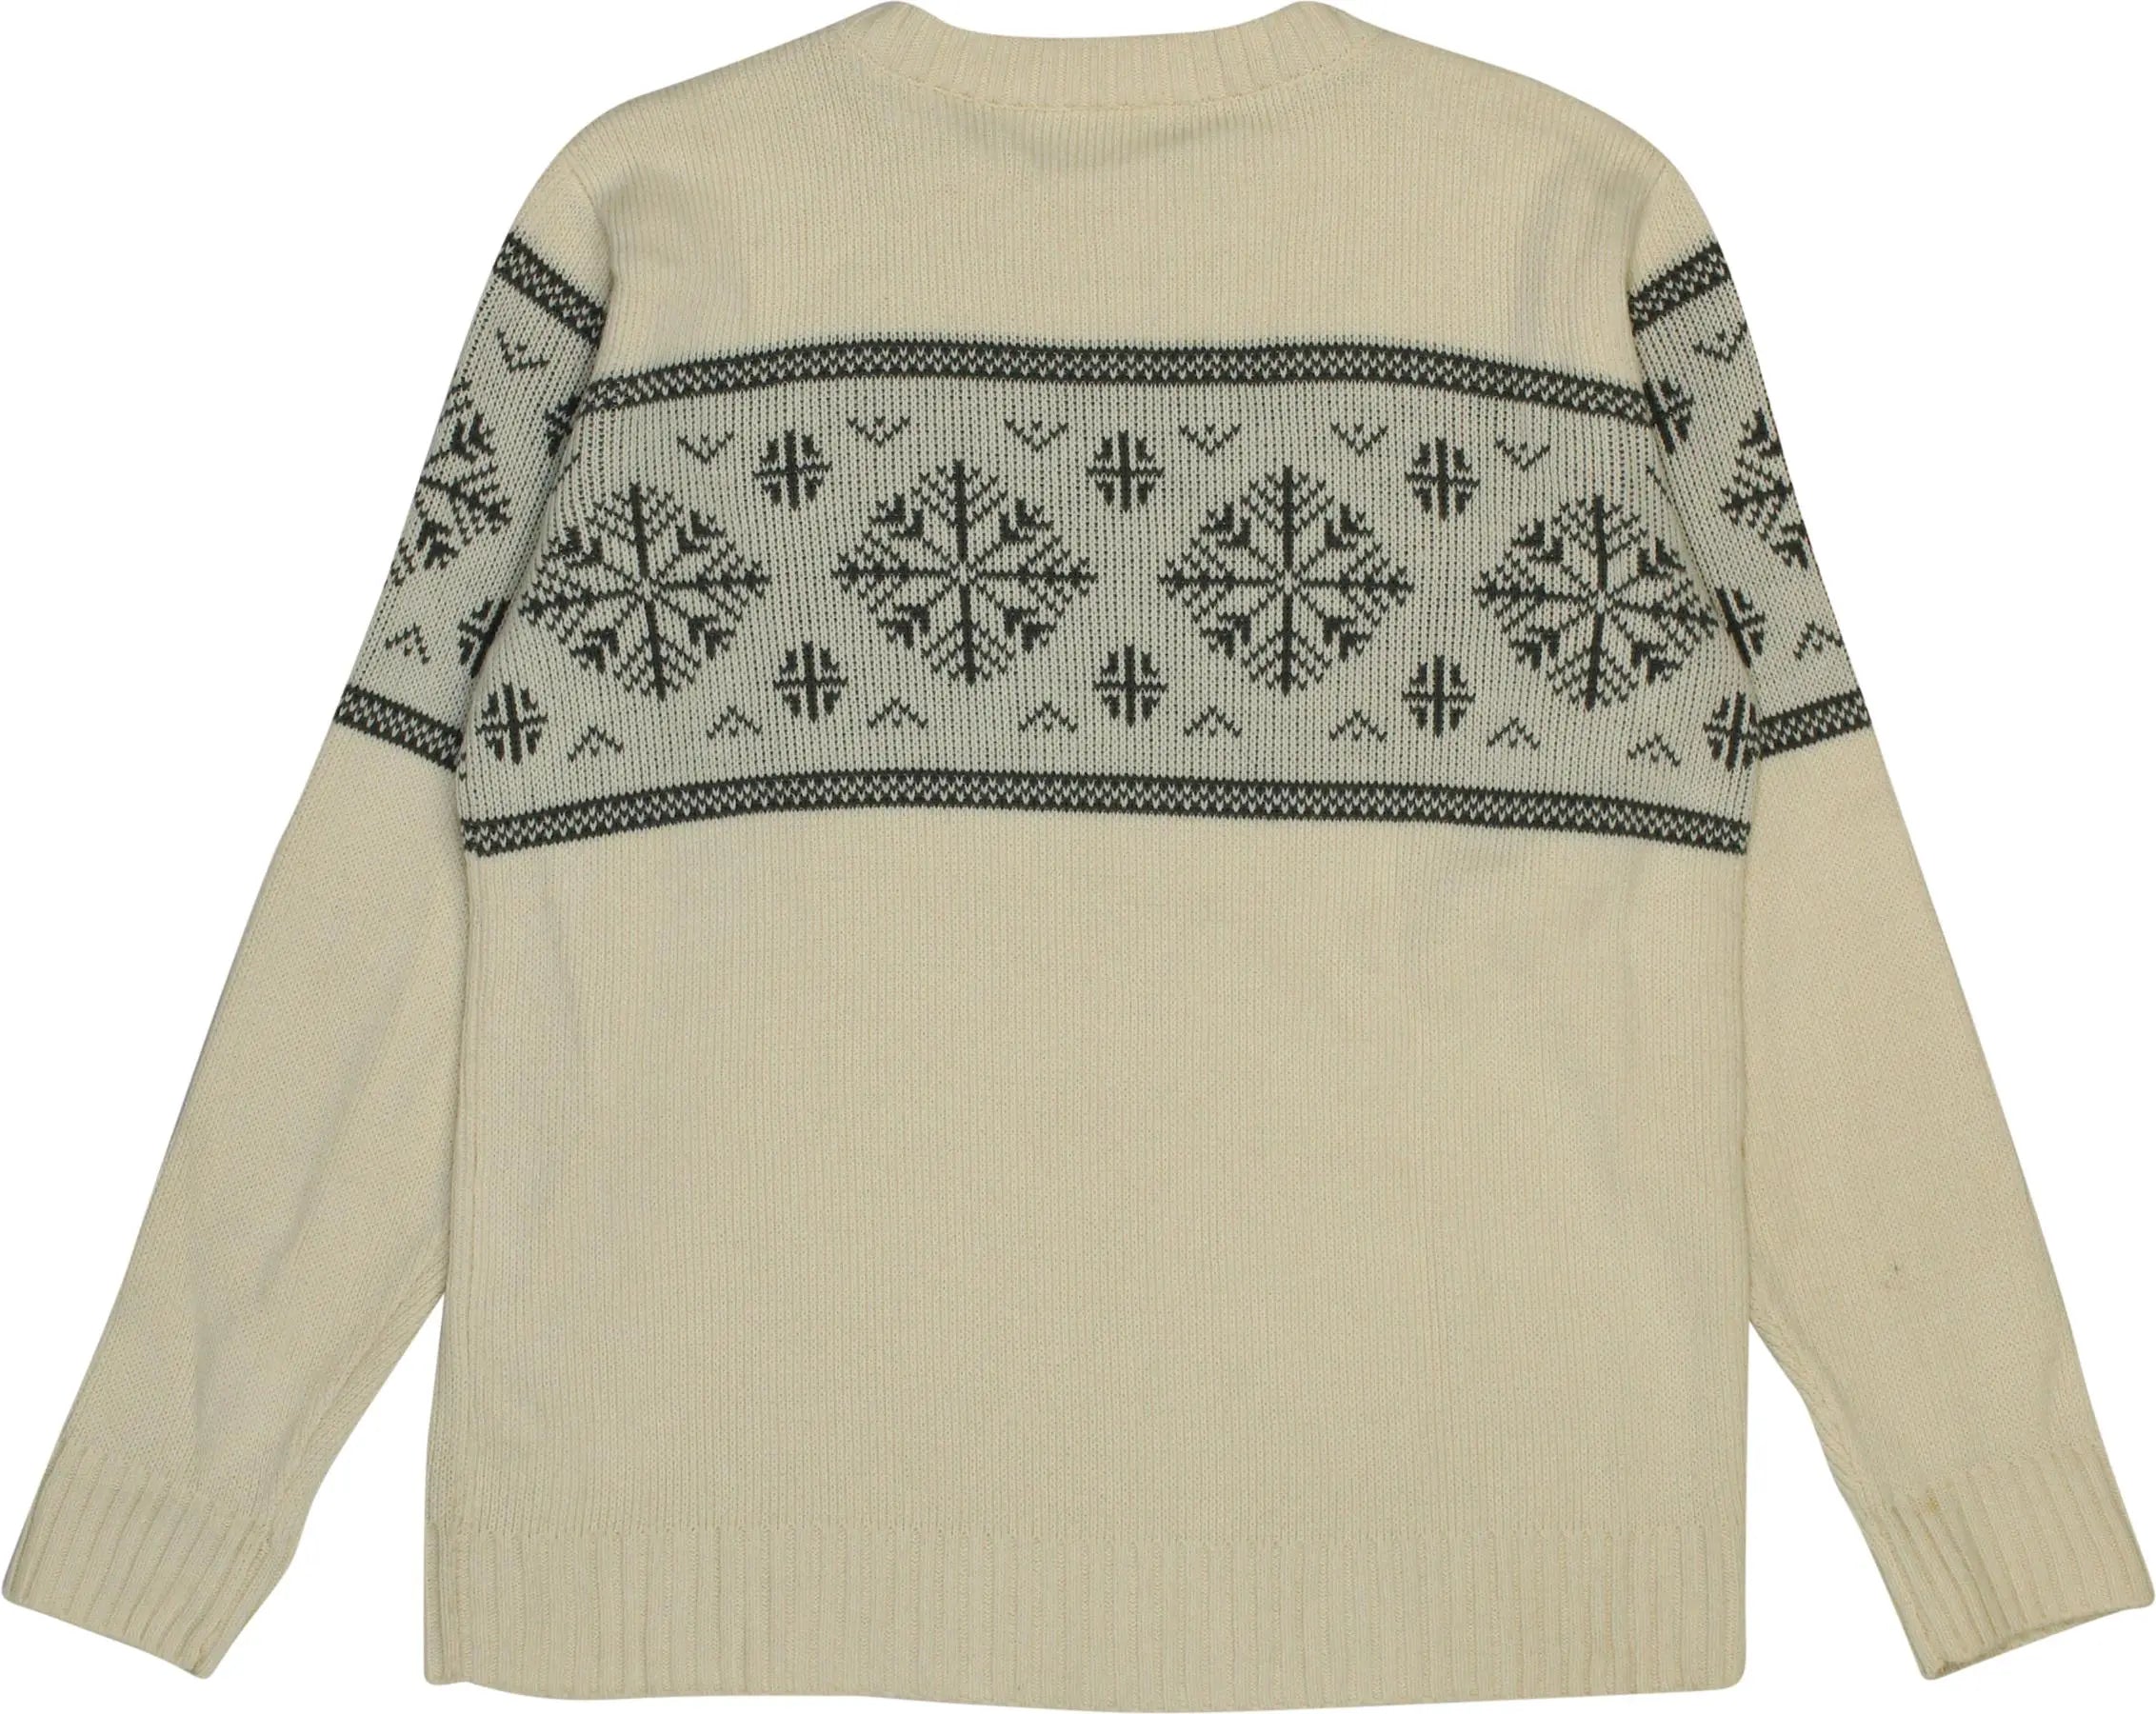 Unknown - Nordic Jumper- ThriftTale.com - Vintage and second handclothing